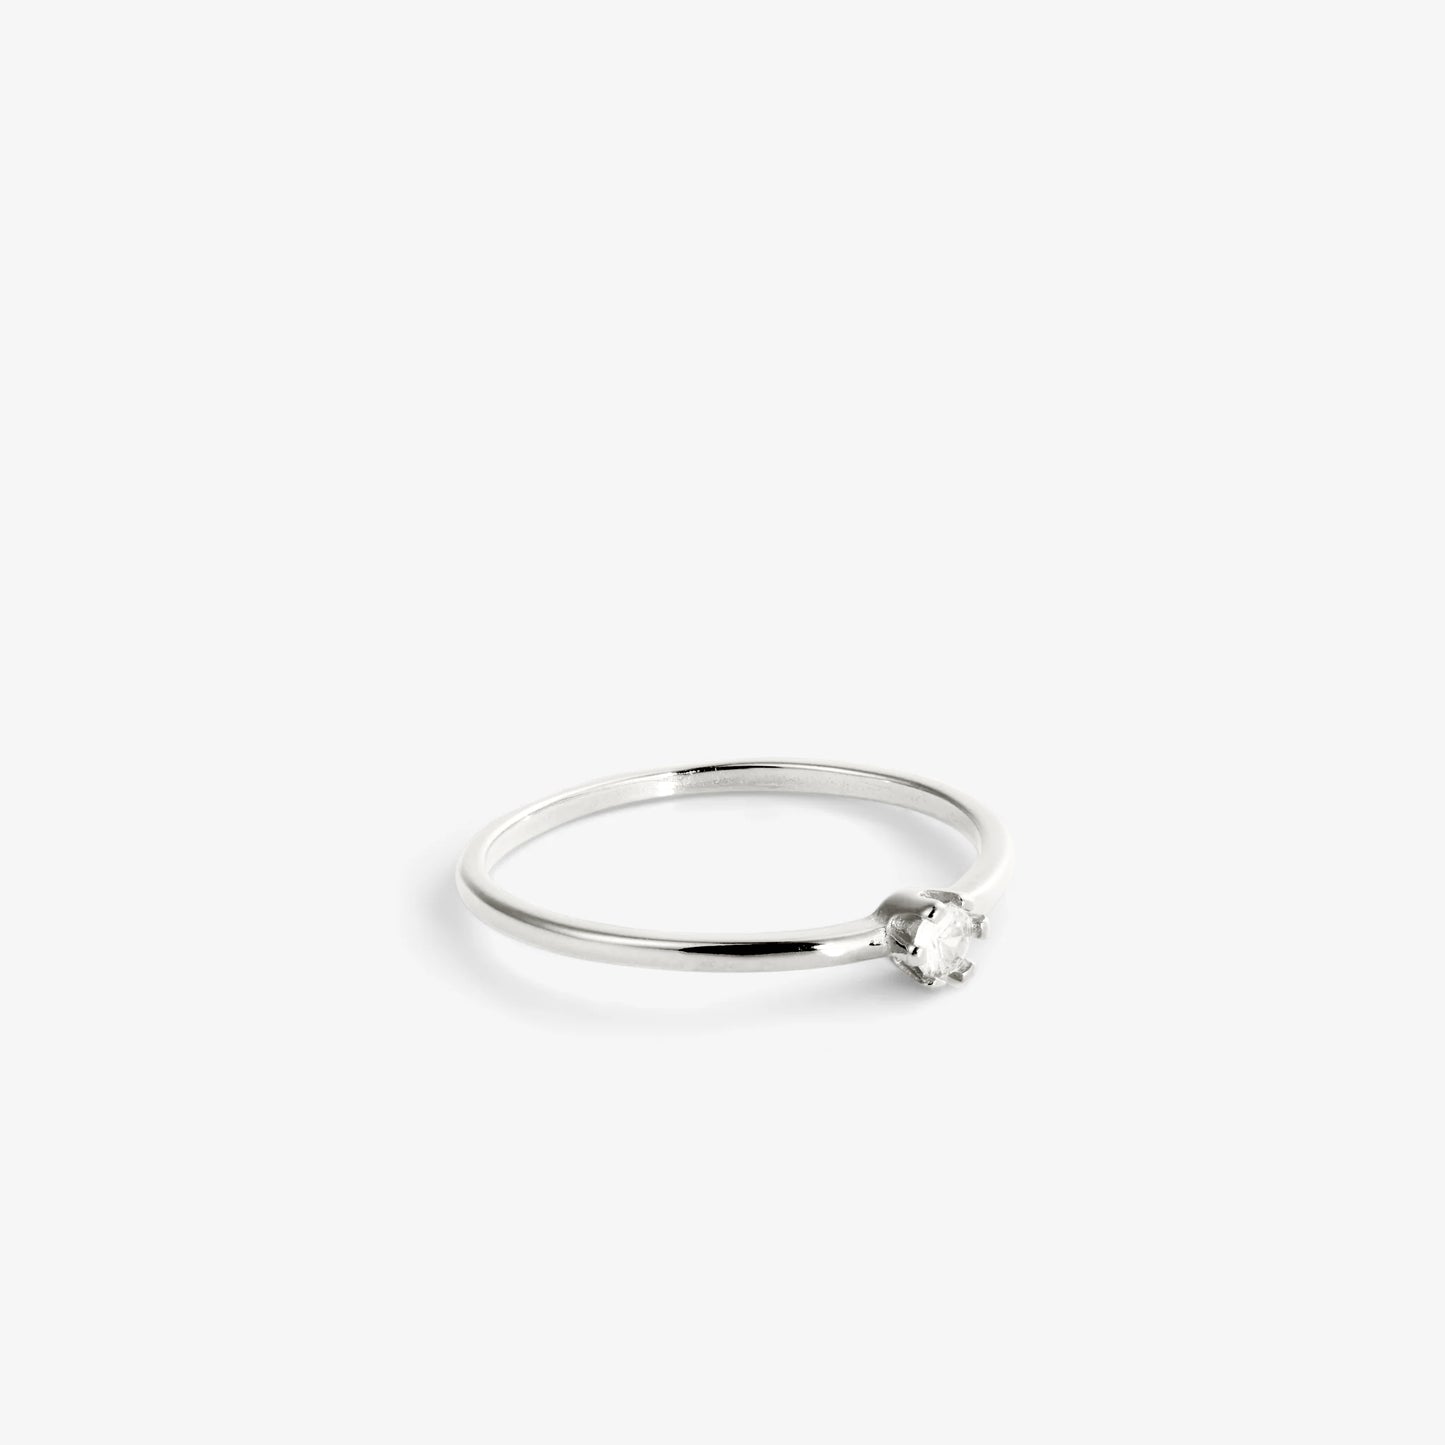 ROUND THIN SOLITAIRE RING Silver